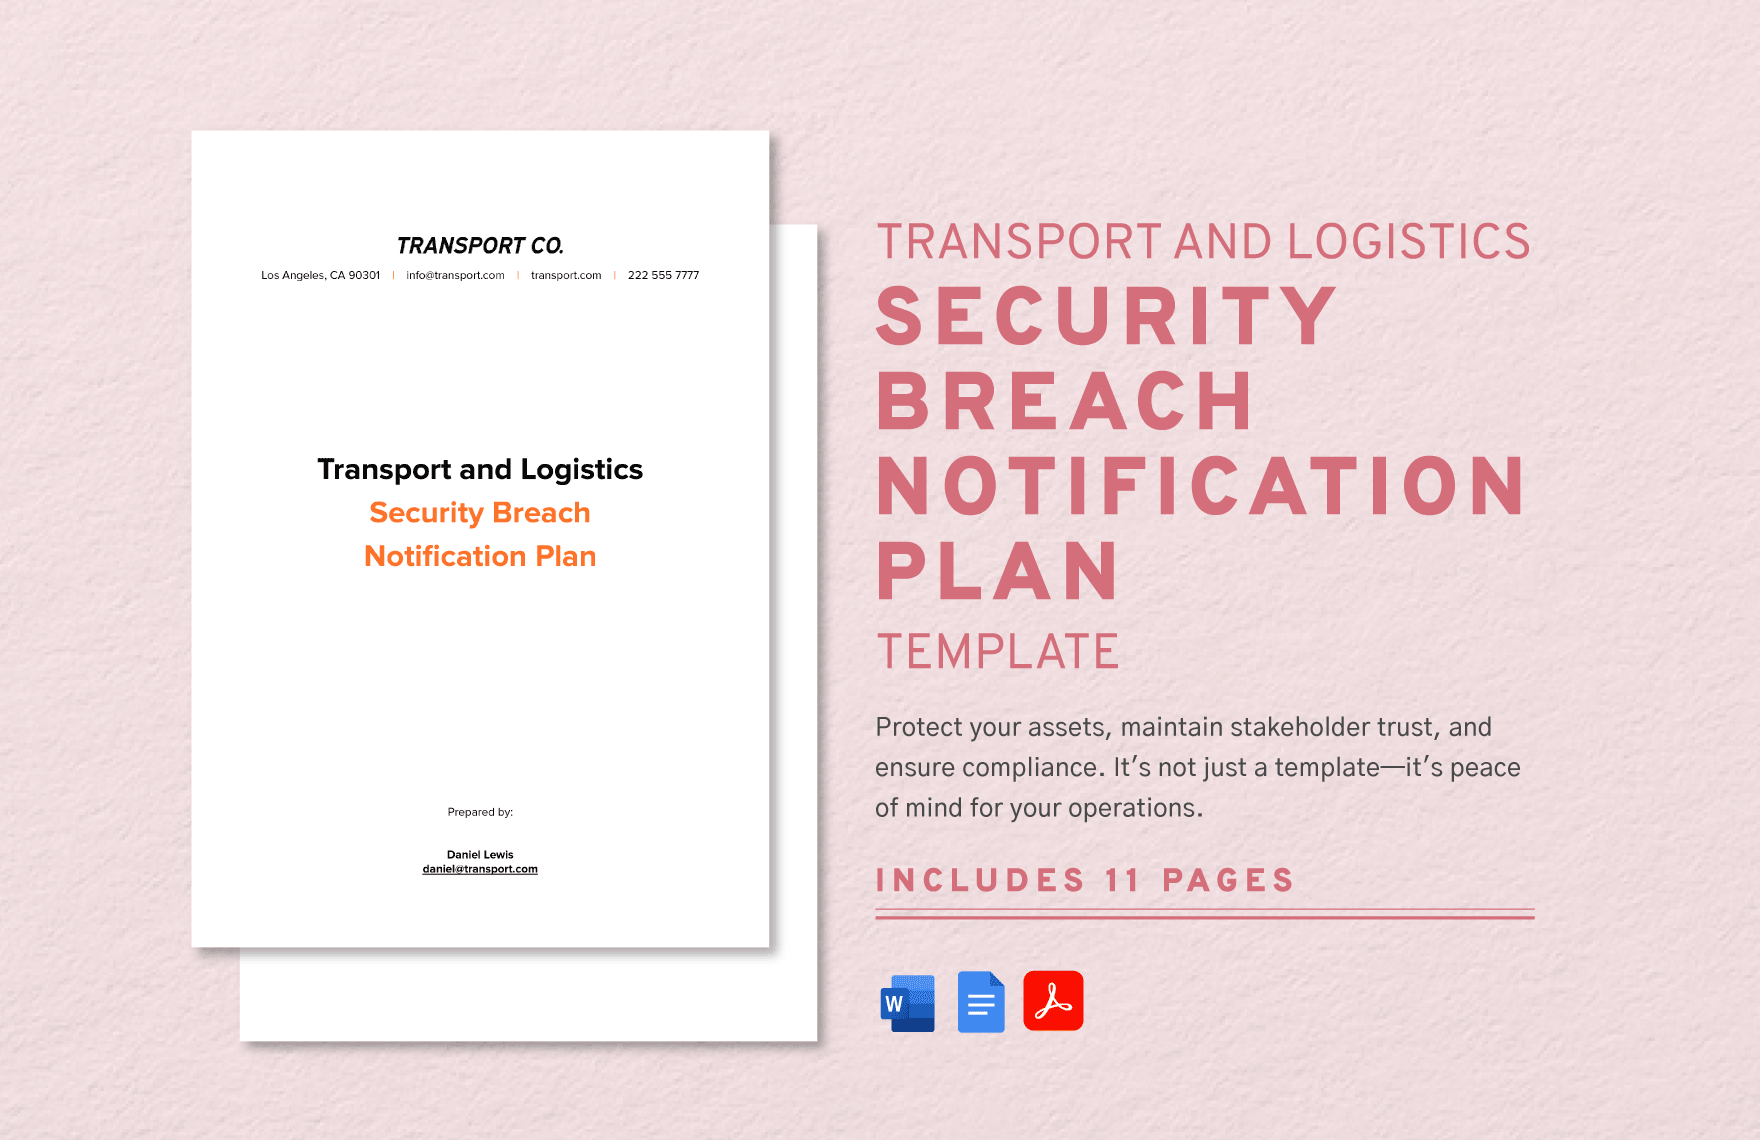 Transport and Logistics Security Breach Notification Plan Template